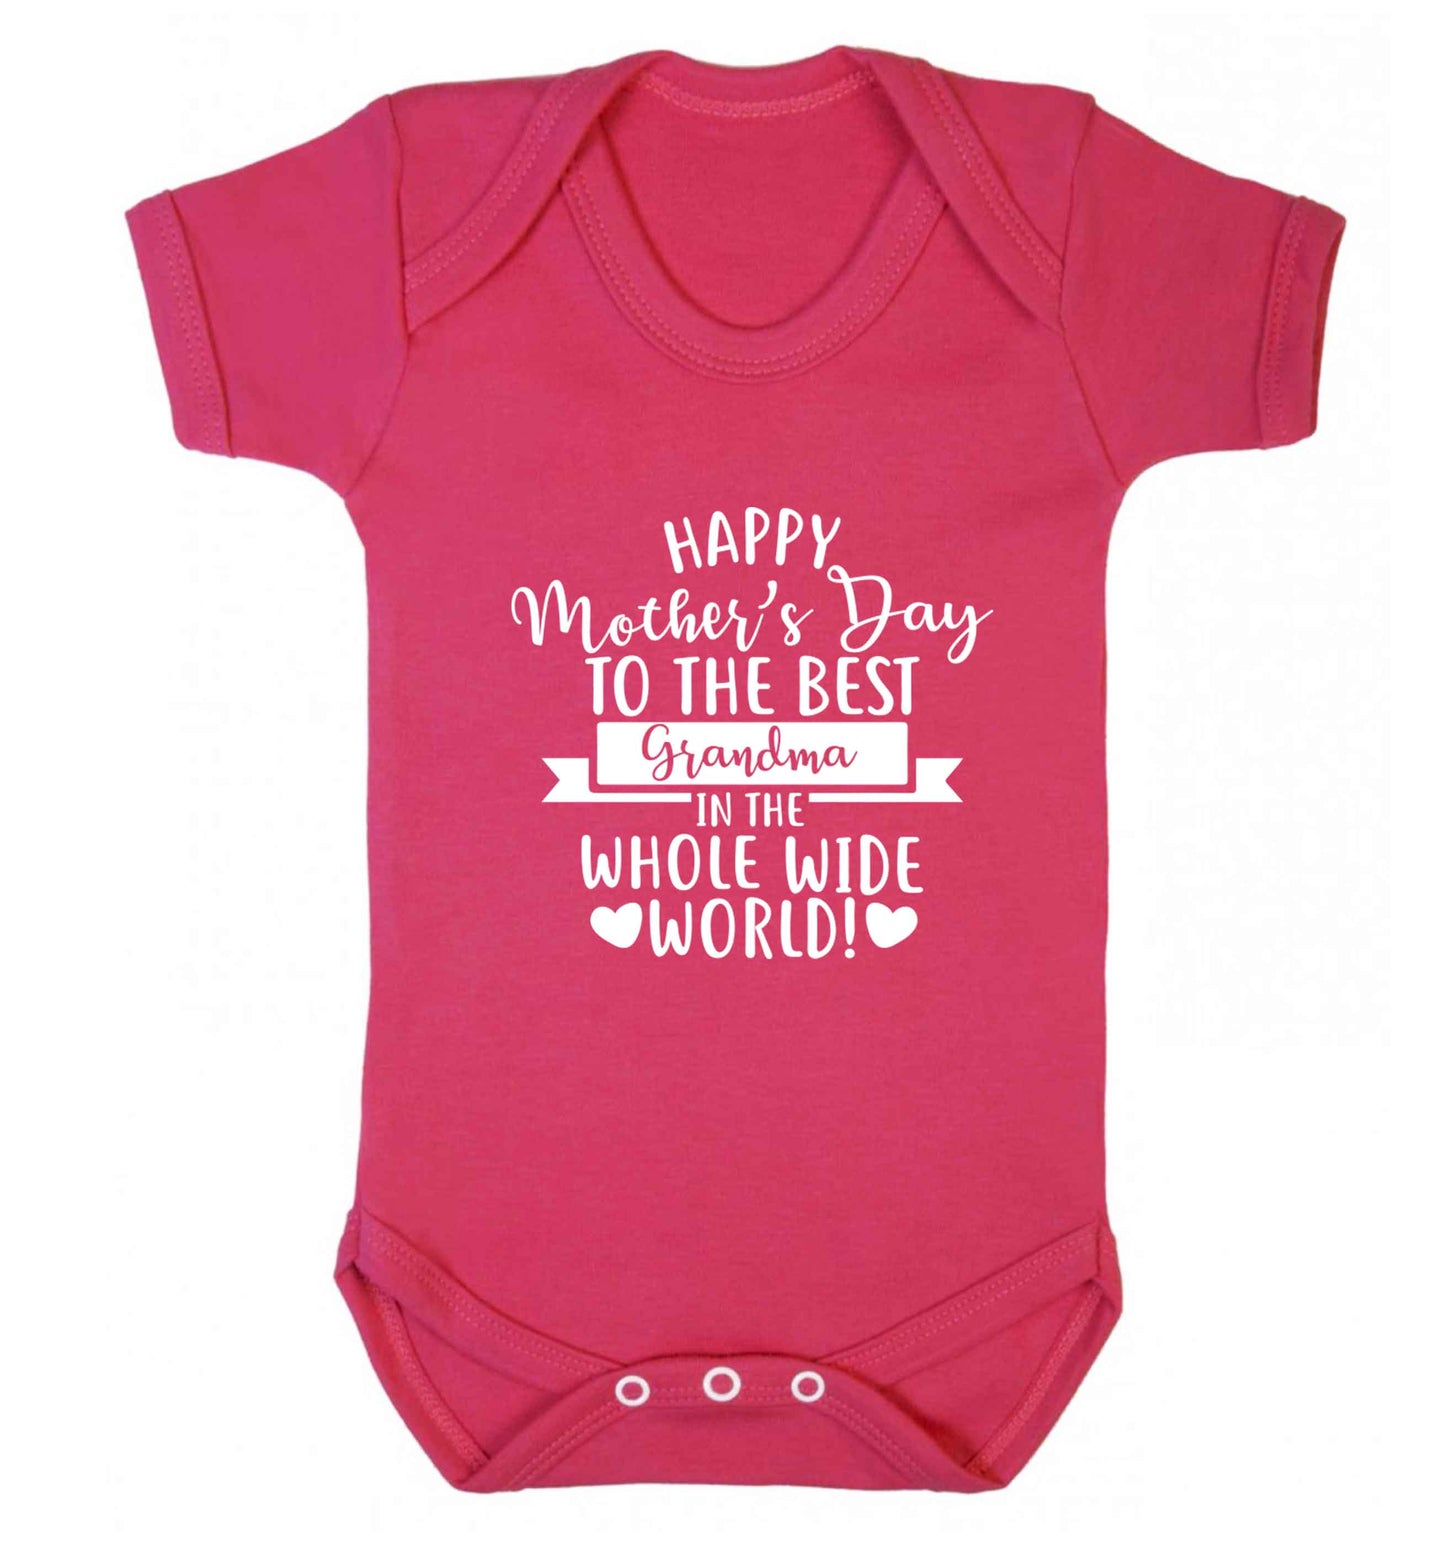 Happy mother's day to the best grandma in the world baby vest dark pink 18-24 months